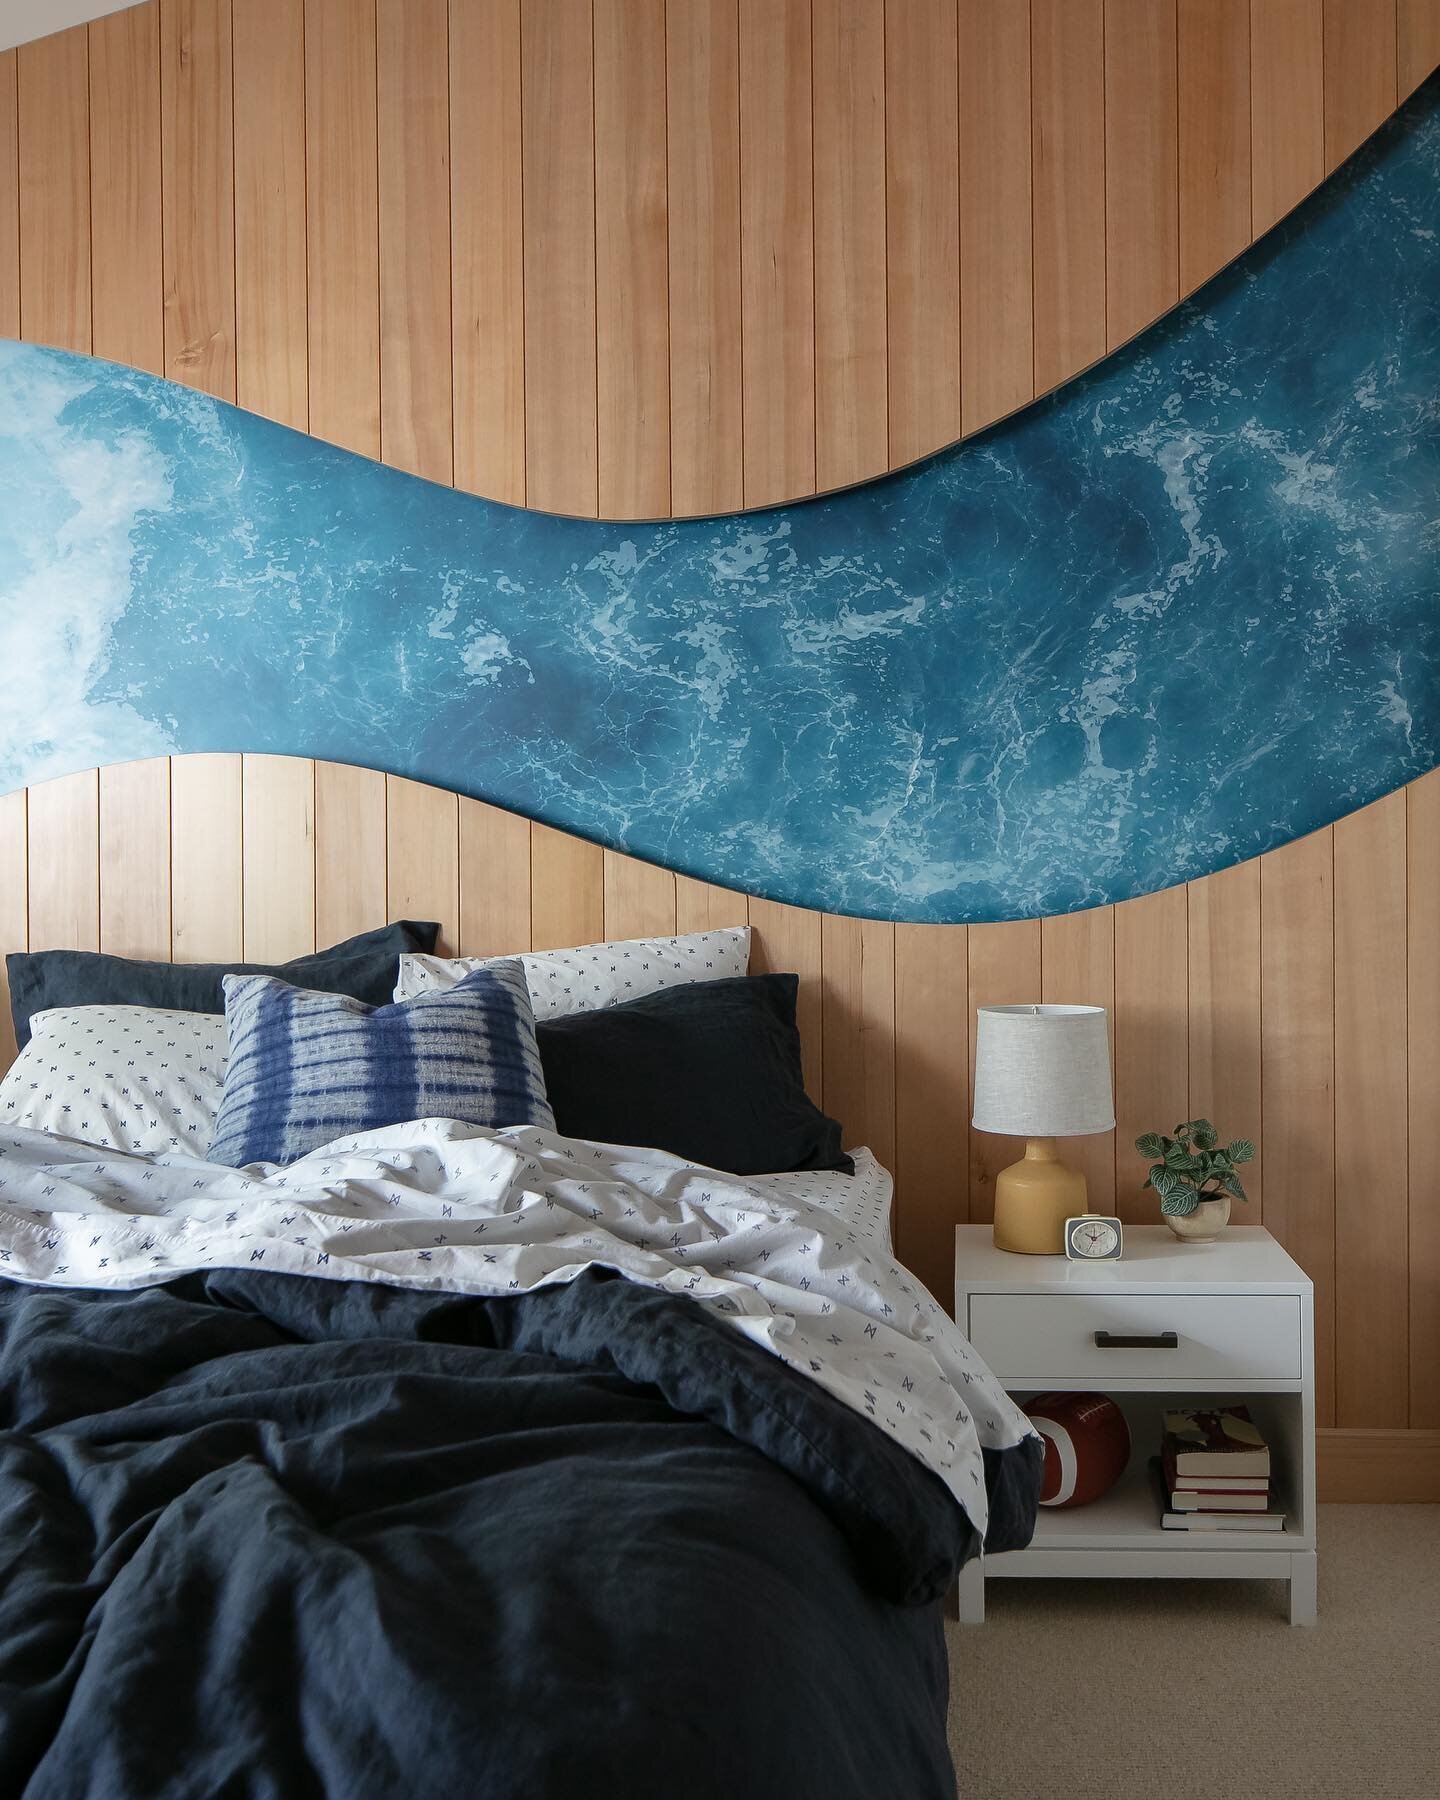 Team messy bed or 👈 team tidy? This giant wave wall imagined by our client and brought to life by @orangecountywoodworks This kiddo will be dreaming of the surf for years to come. #railicadesign @austarchitect @showalterconstruction 📸 @ryangarvin